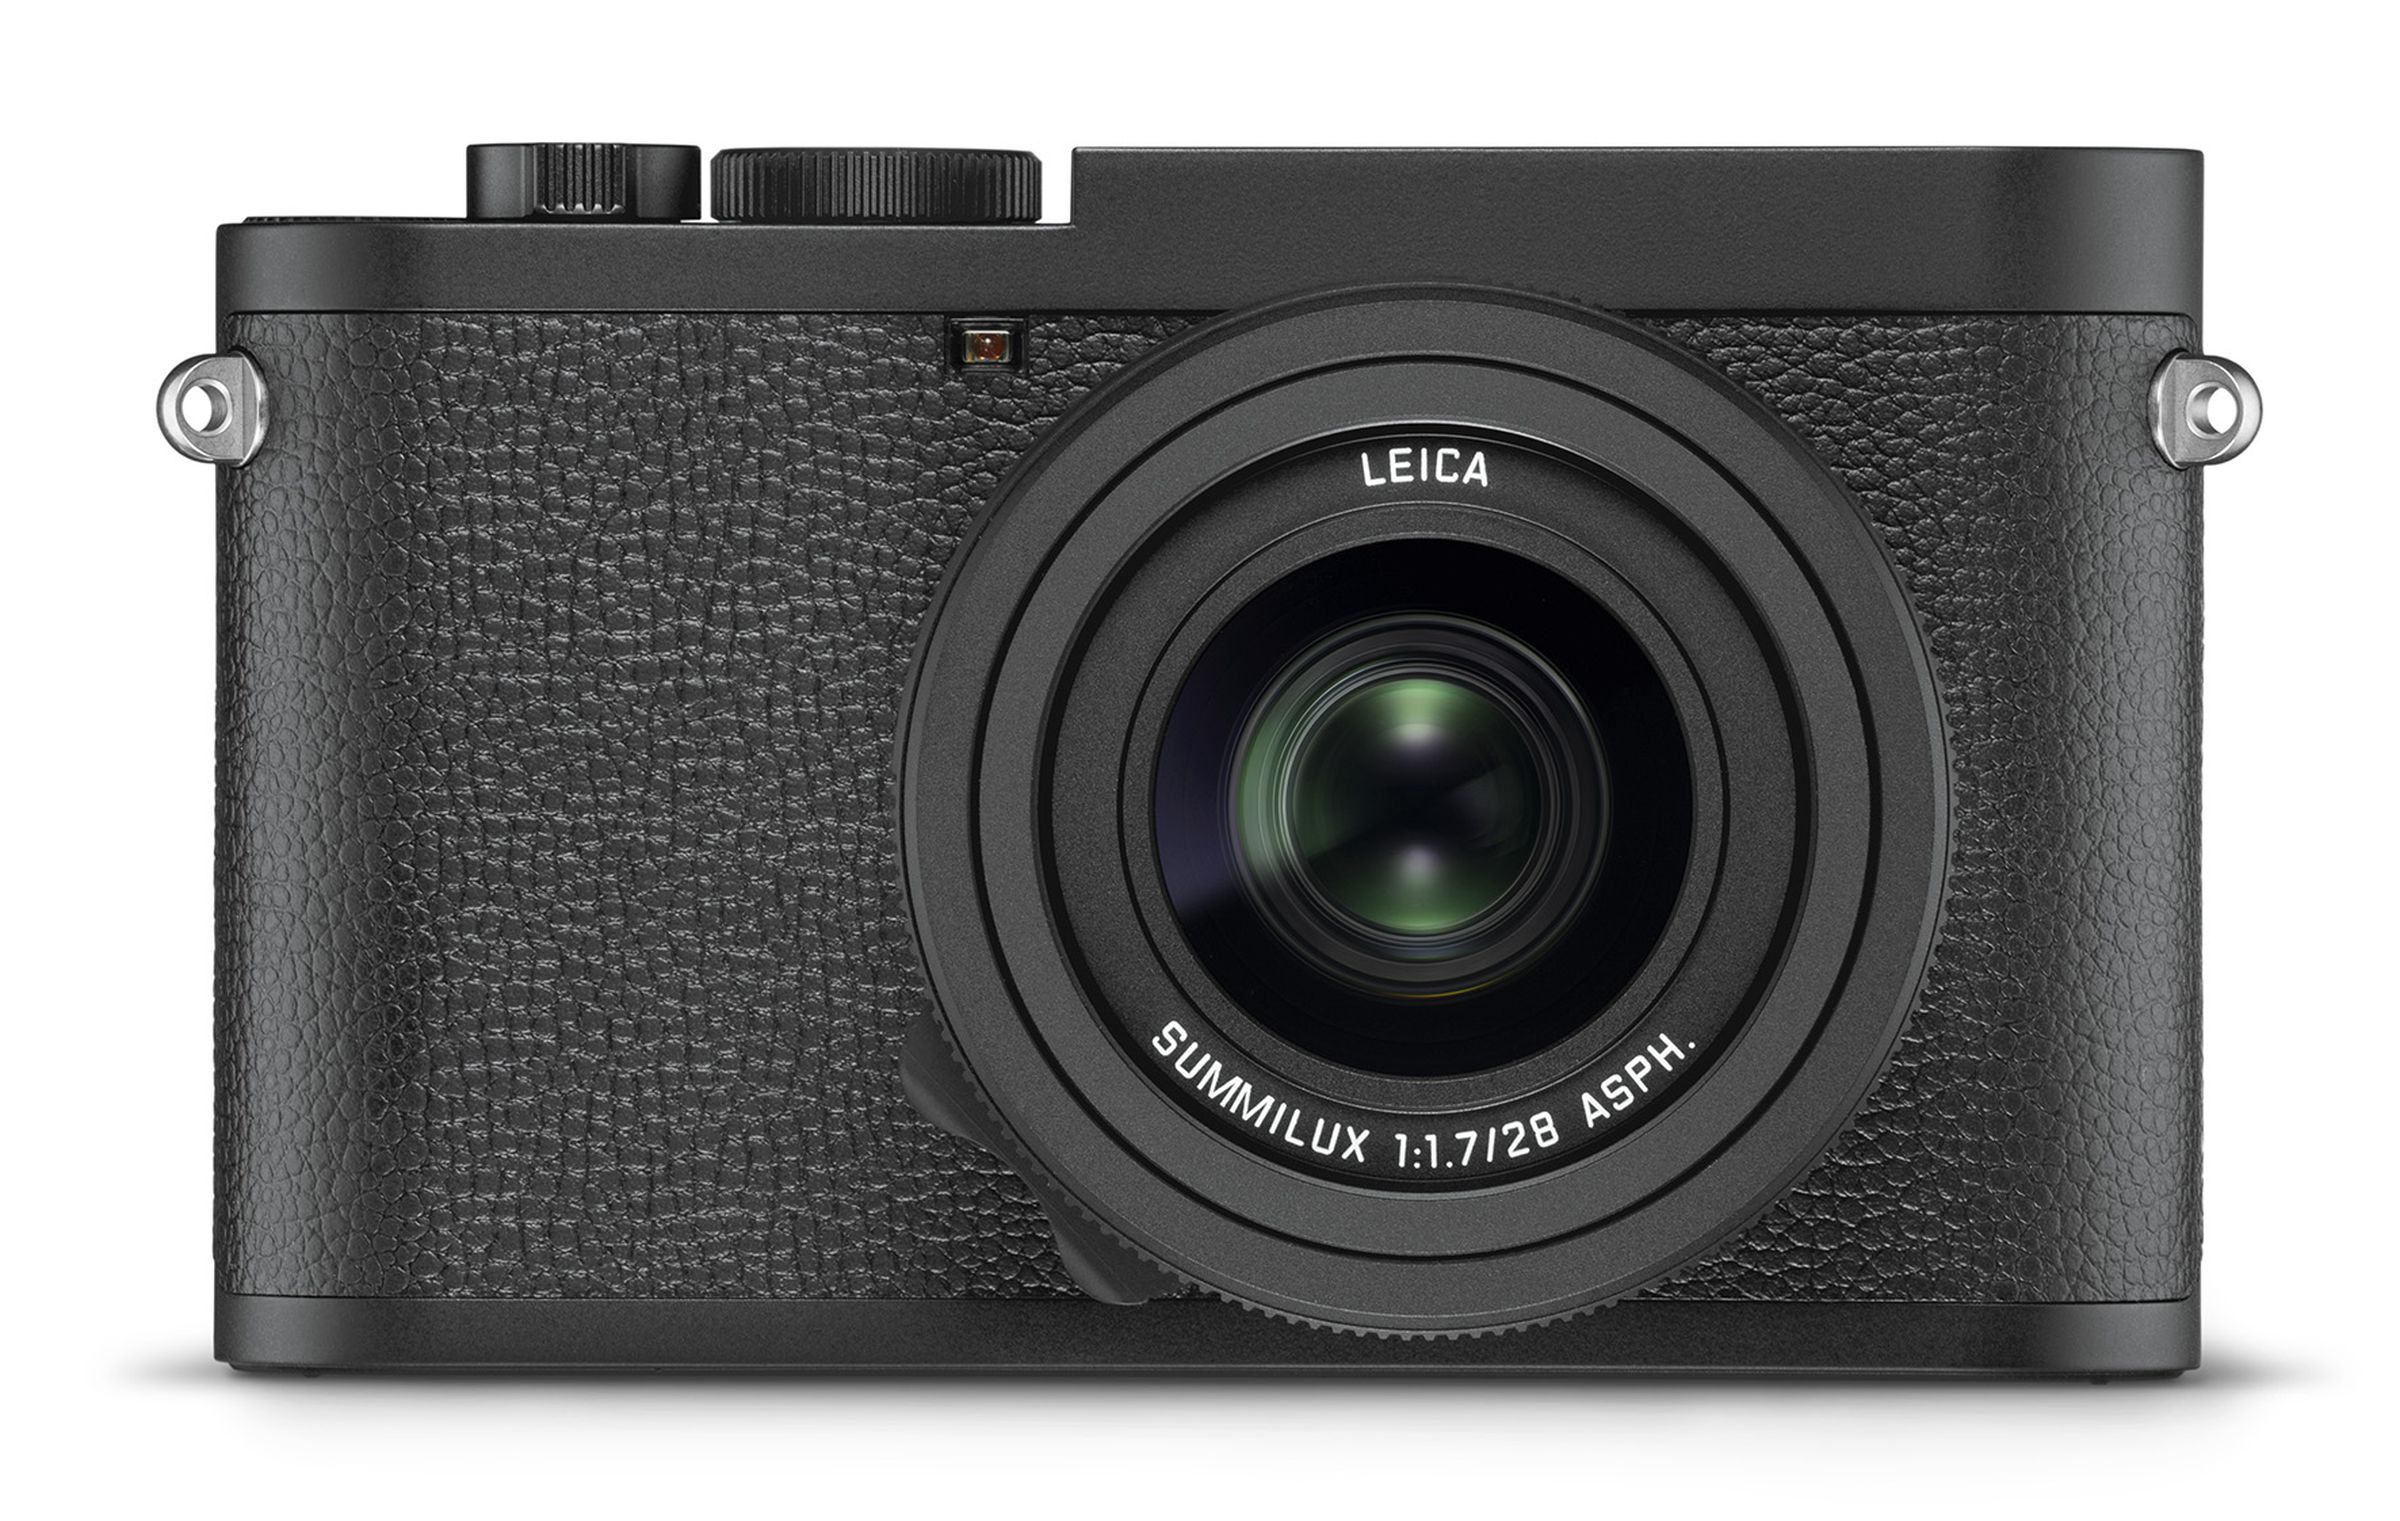 The Q2 Monochrom lacks the signature Leica red badge or any color details on its matte black body.